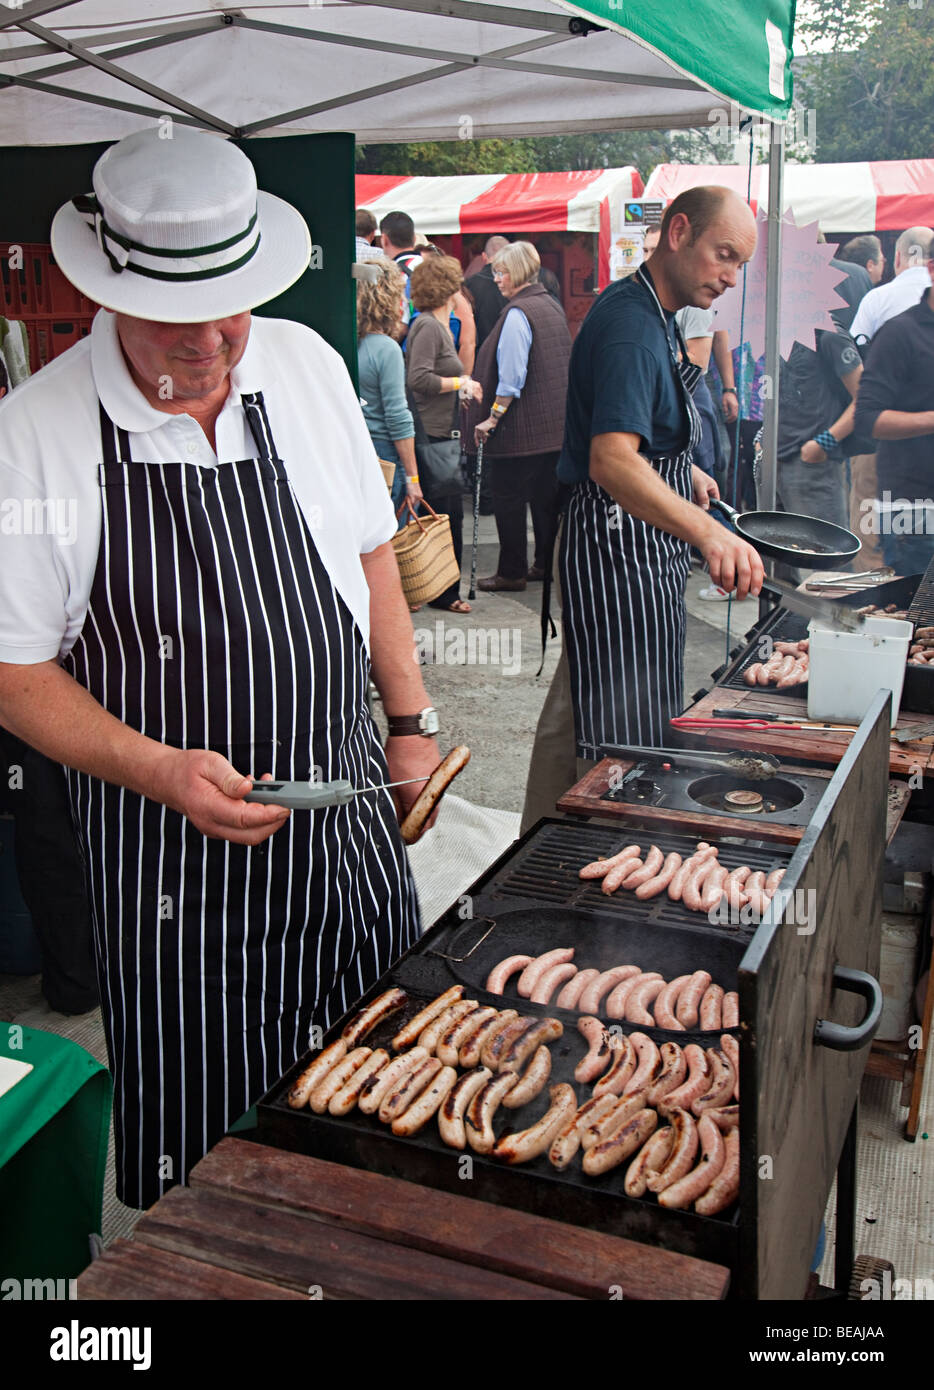 Butcher cooking sausages using temperature probe at open air food festival Abergavenny Wales UK Stock Photo